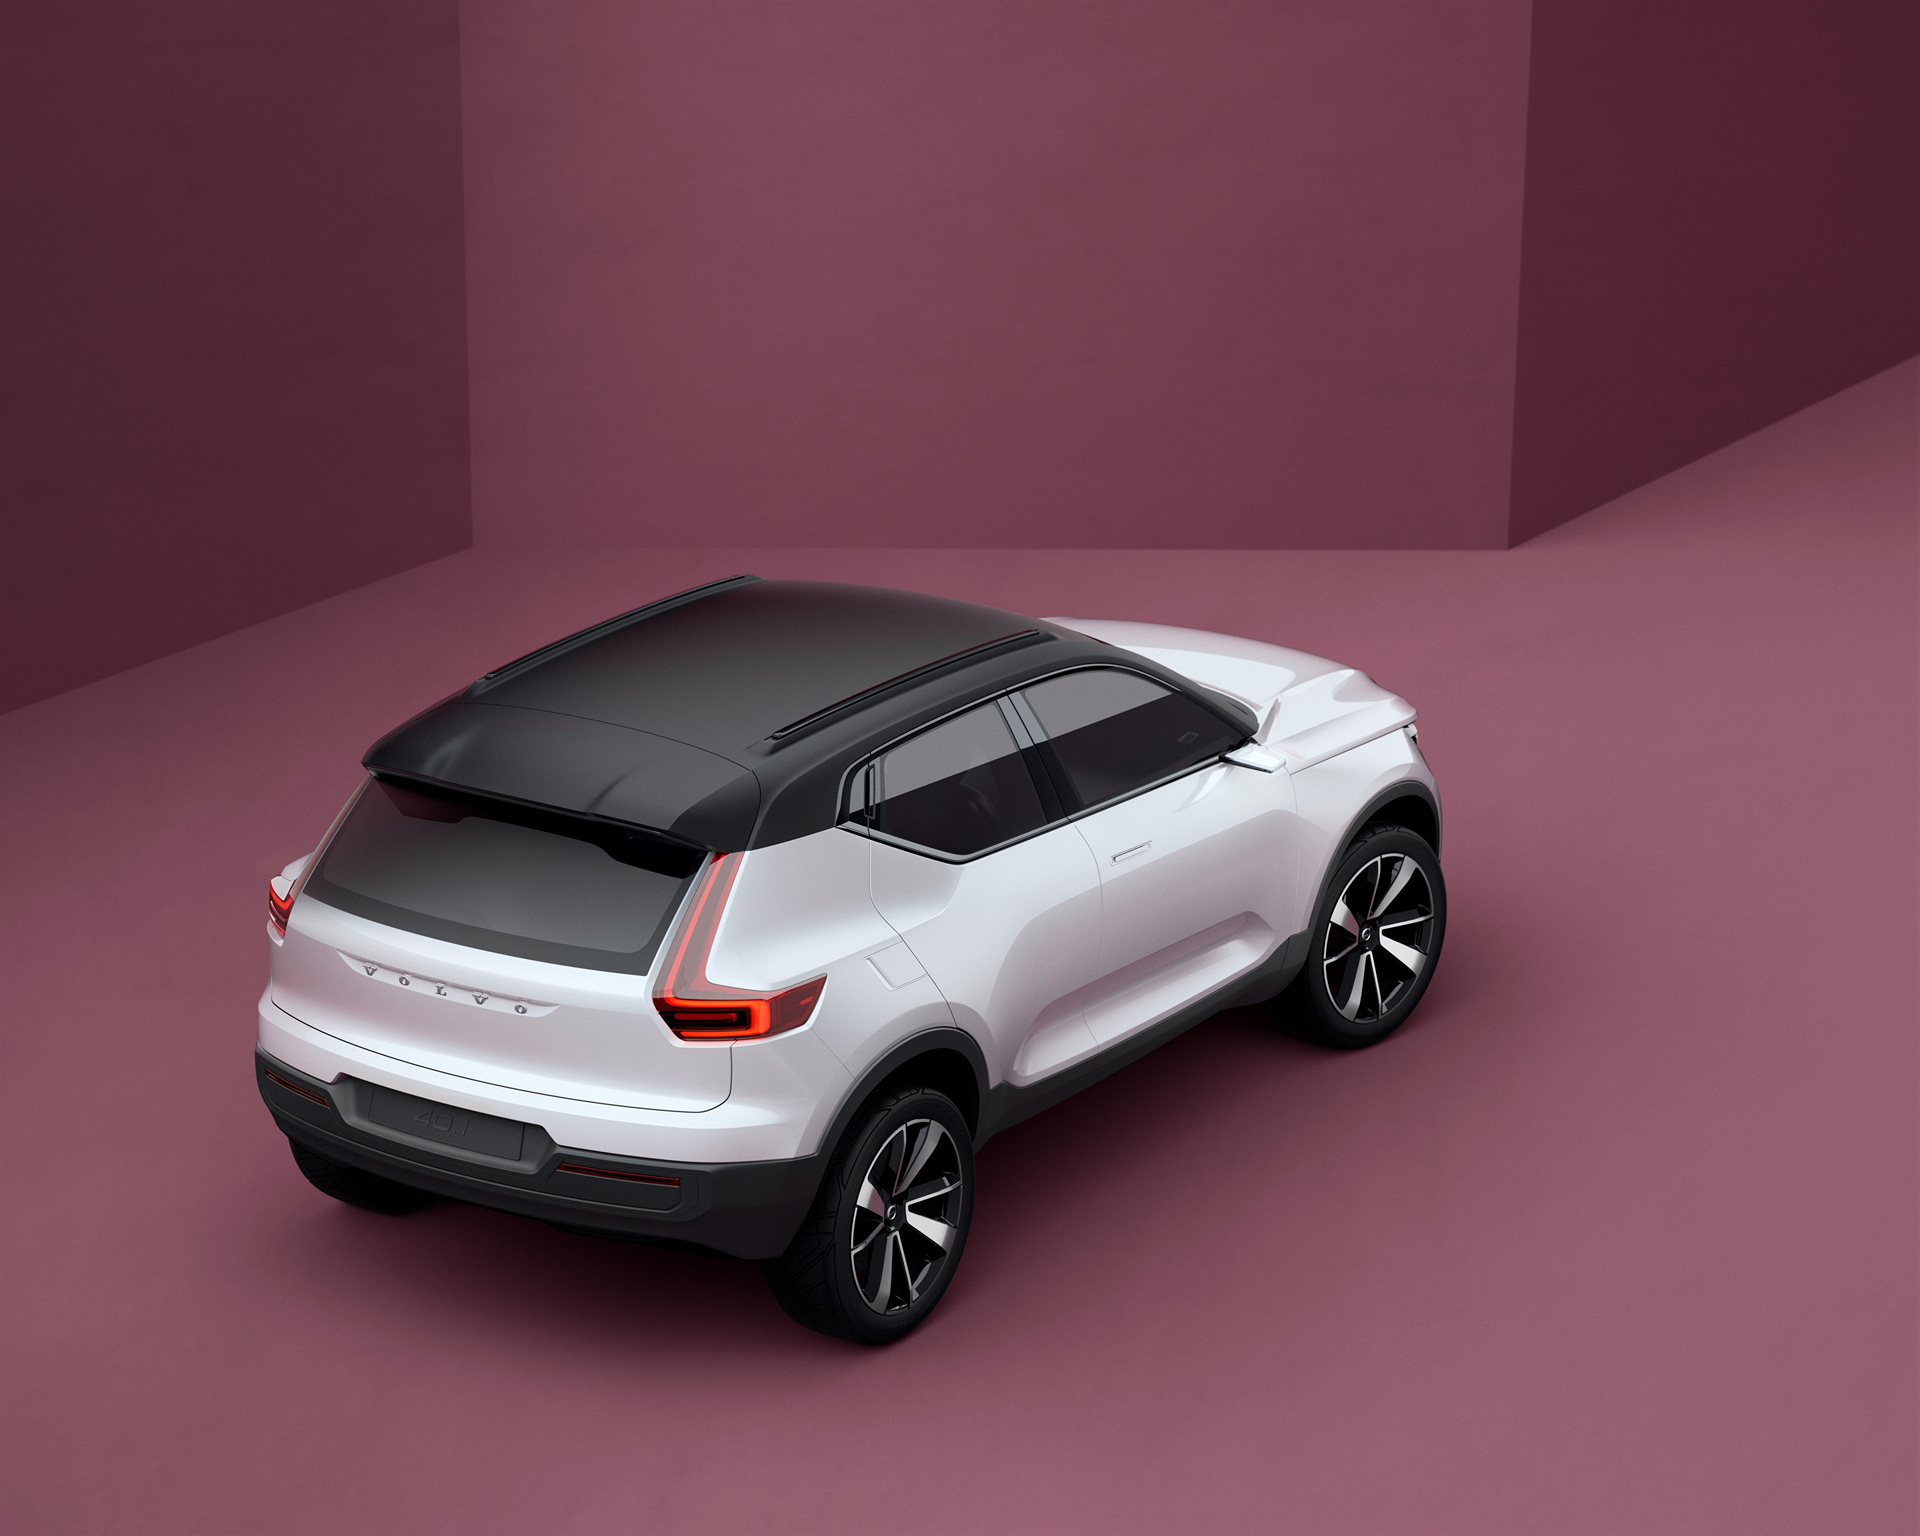 Volvo Concept 40.1 © Zhejiang Geely Holding Group Co., Ltd